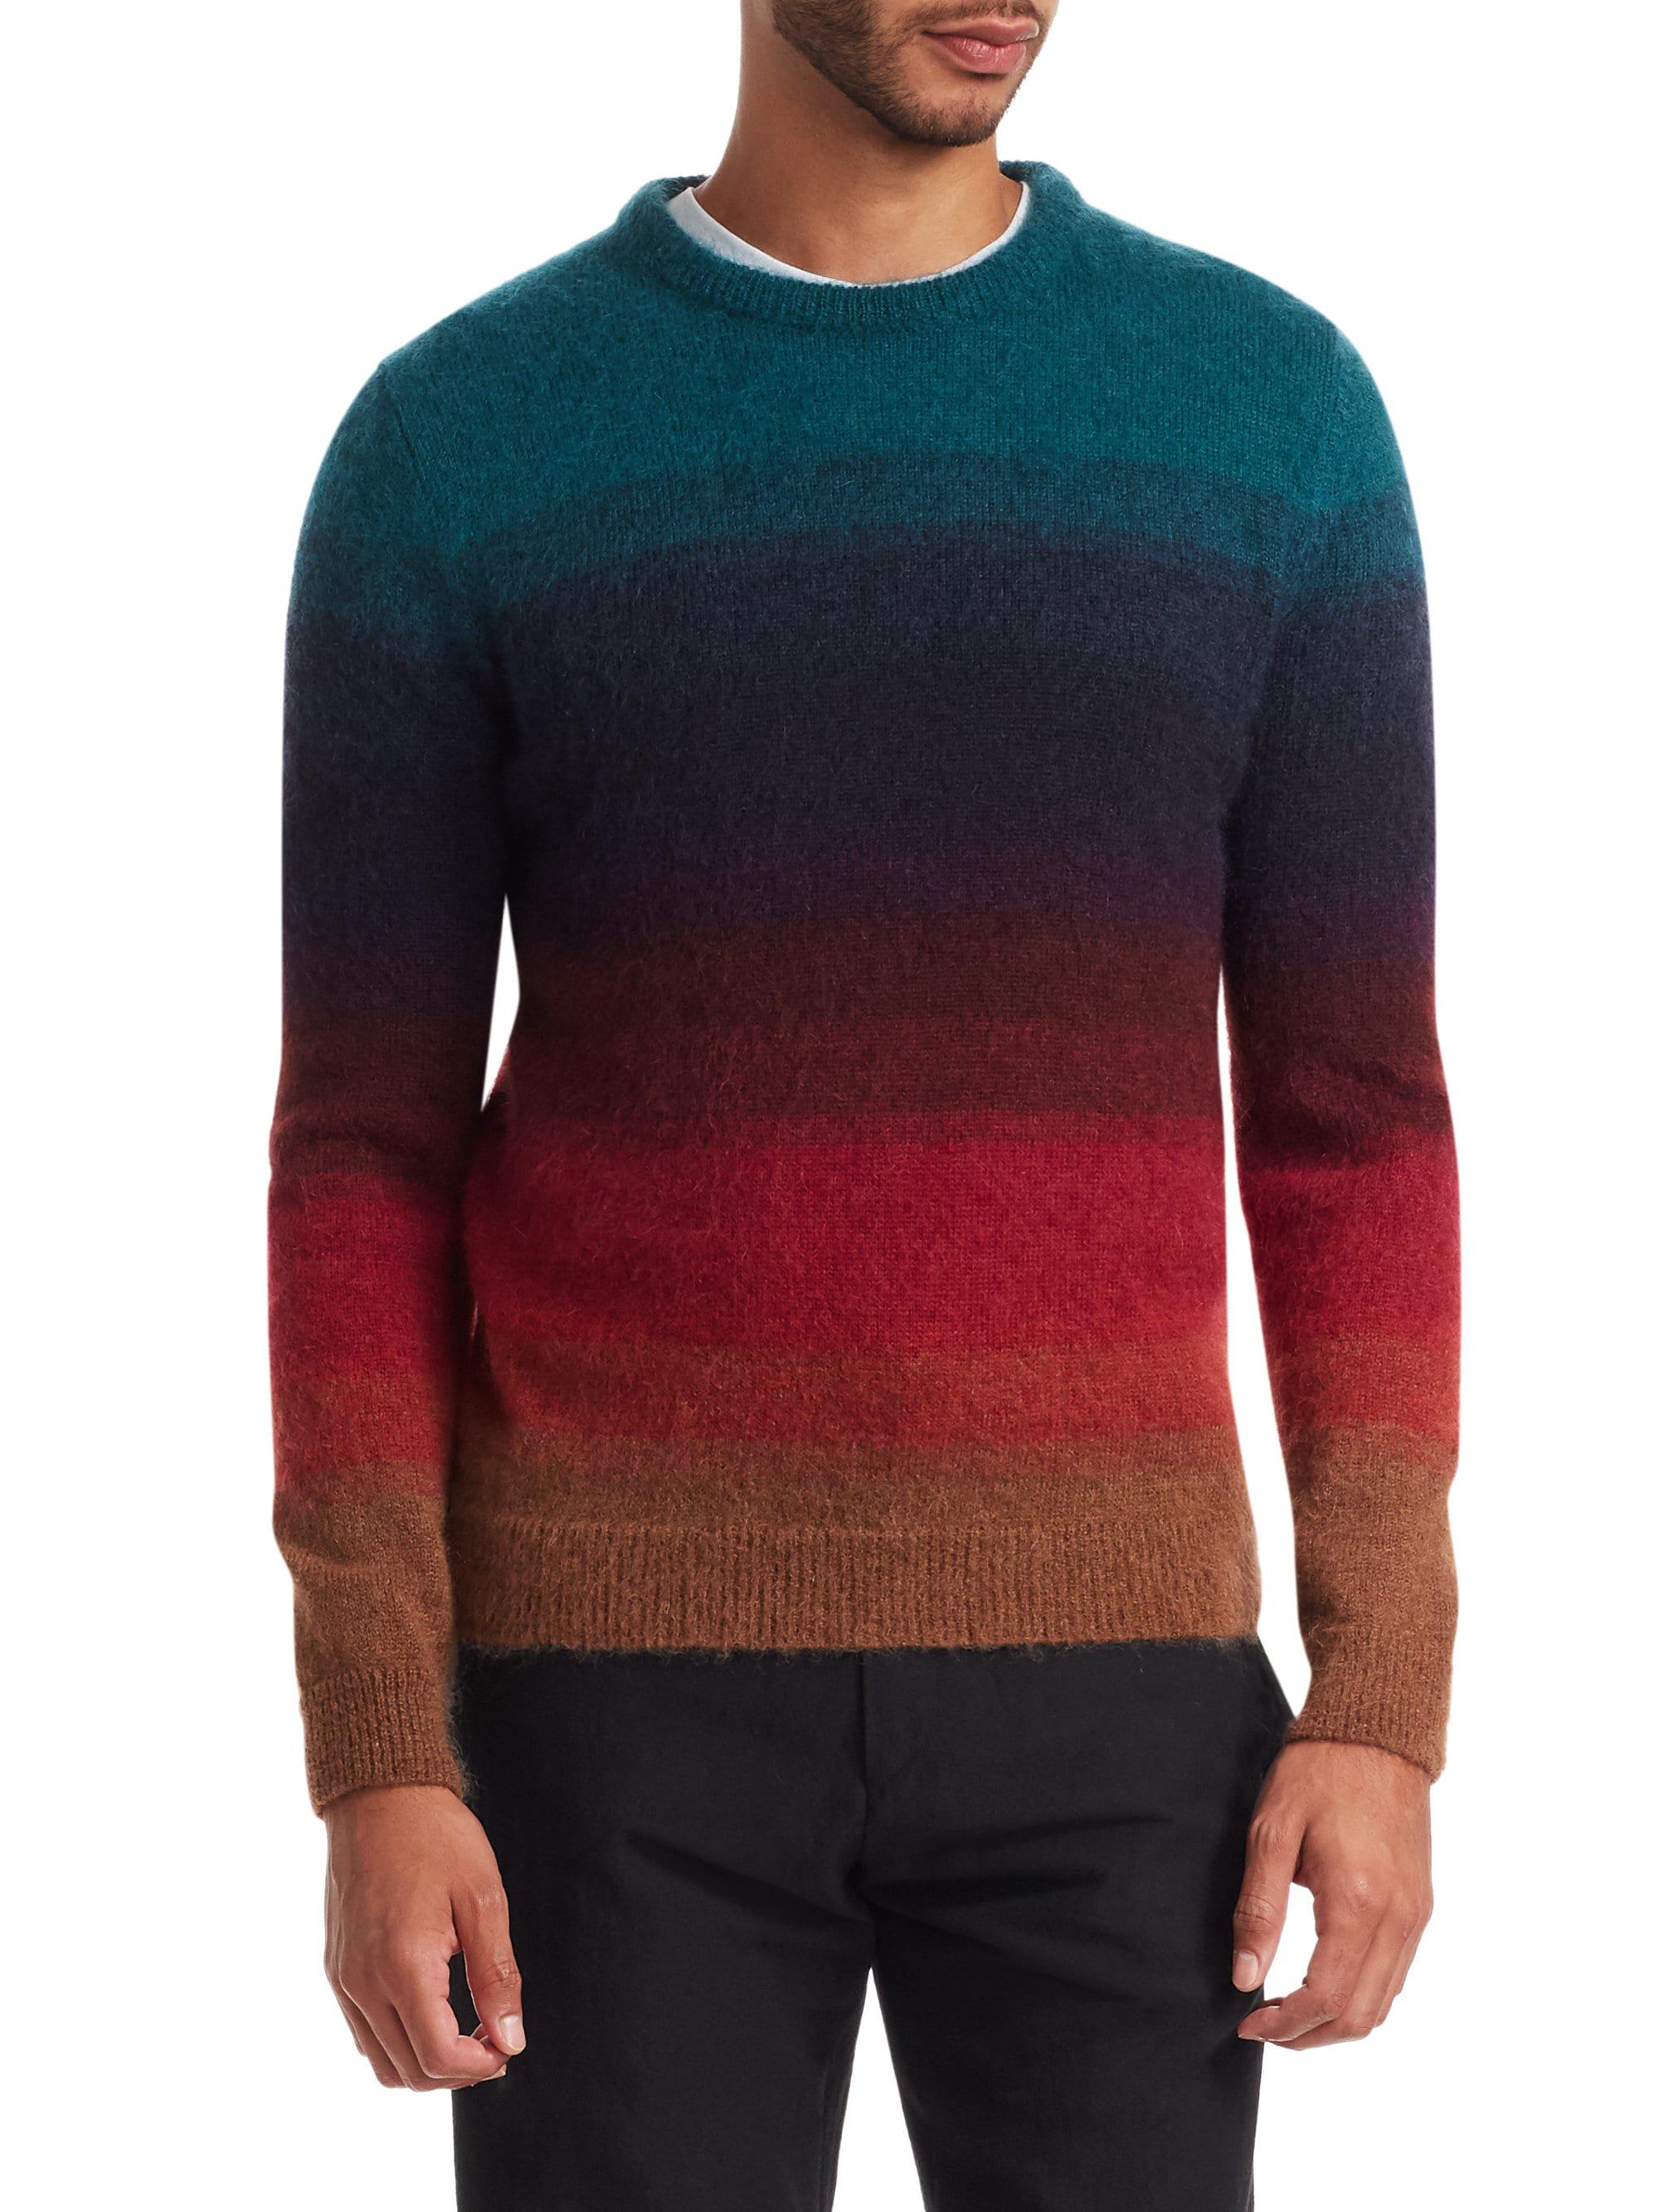 Paul Smith Synthetic Men's Striped Ombre Sweater for Men - Lyst